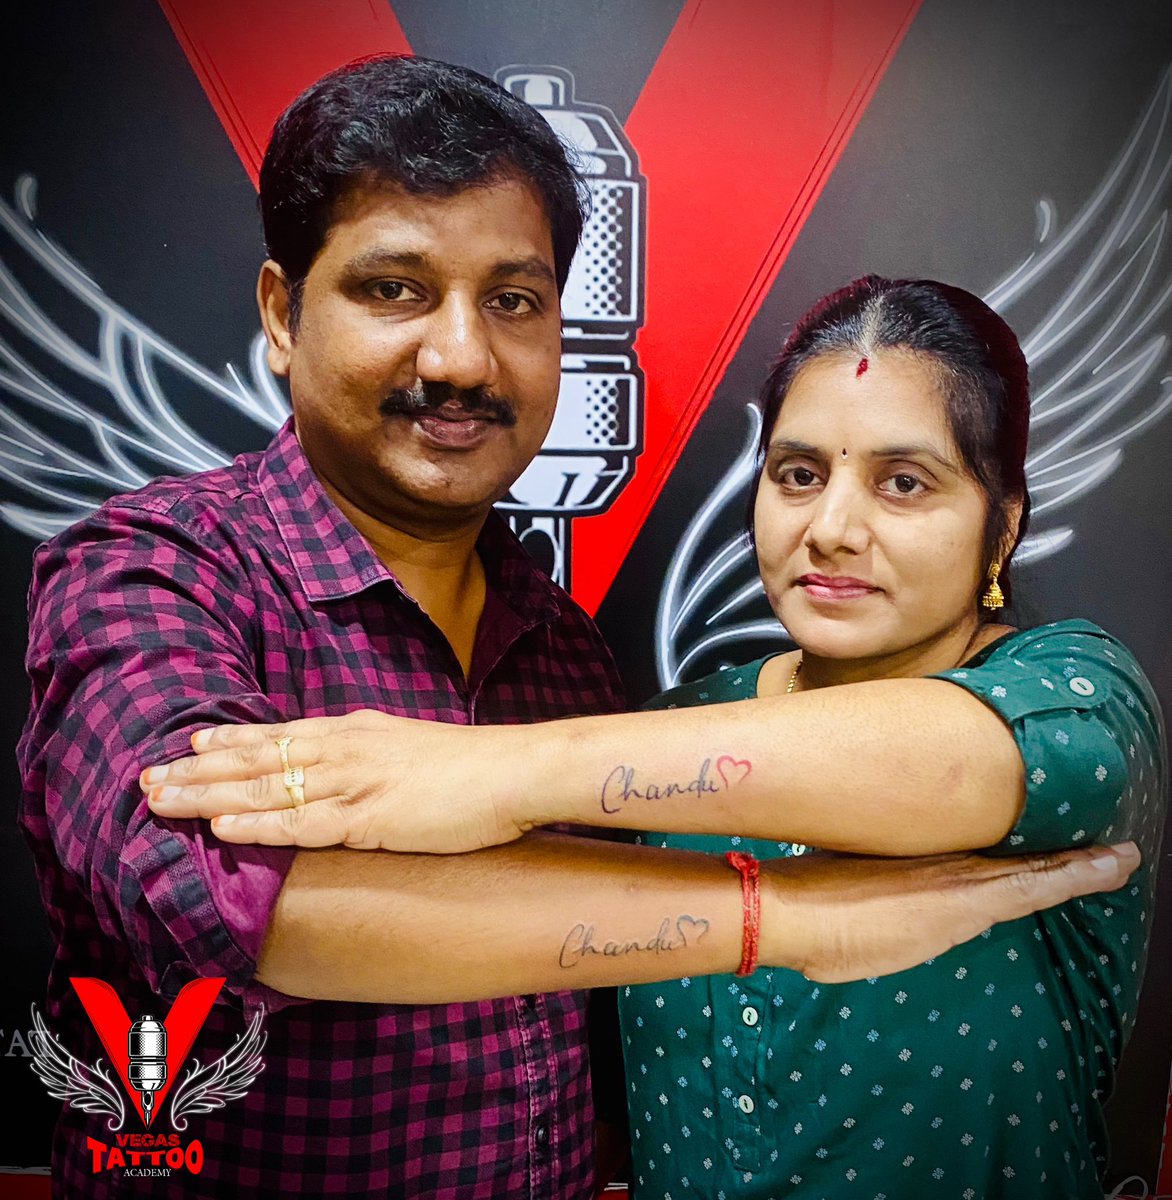 Book slot for customised designs 
To book appointment 👉🏻 9542525045.

#coupletattoo #couplegoals #couple #tattoo #coupletattoodesigns #tattooshopinhyderabad #tattooartistinhyderabad #mandalaart #besttattoostudio #besttattoostudioinhyderabad #vegastattoostudiohyderabad